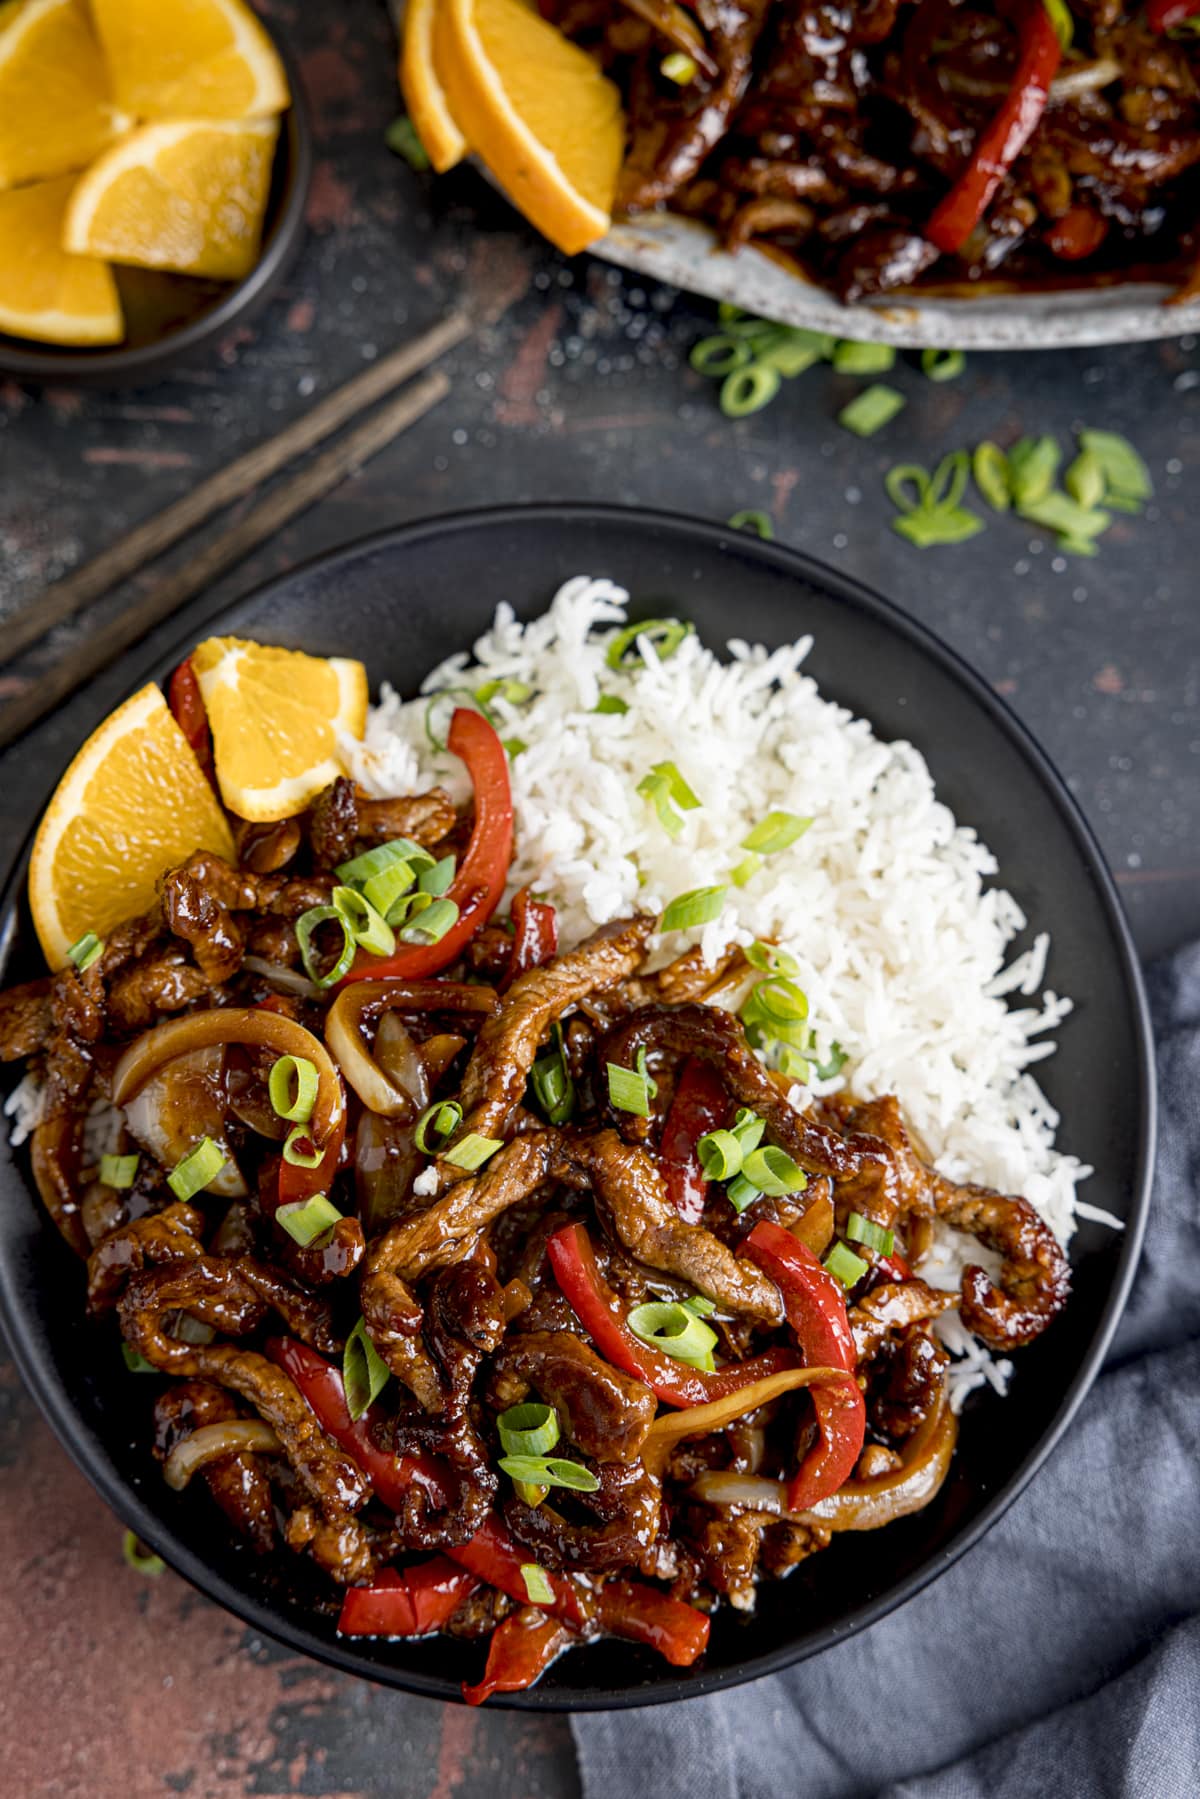 Overhead of crispy orange beef with peppers and onions on a dark plate with cooked rice.  There are slices of orange and spring onion scattered around, and a pair of chopsticks by the plate.